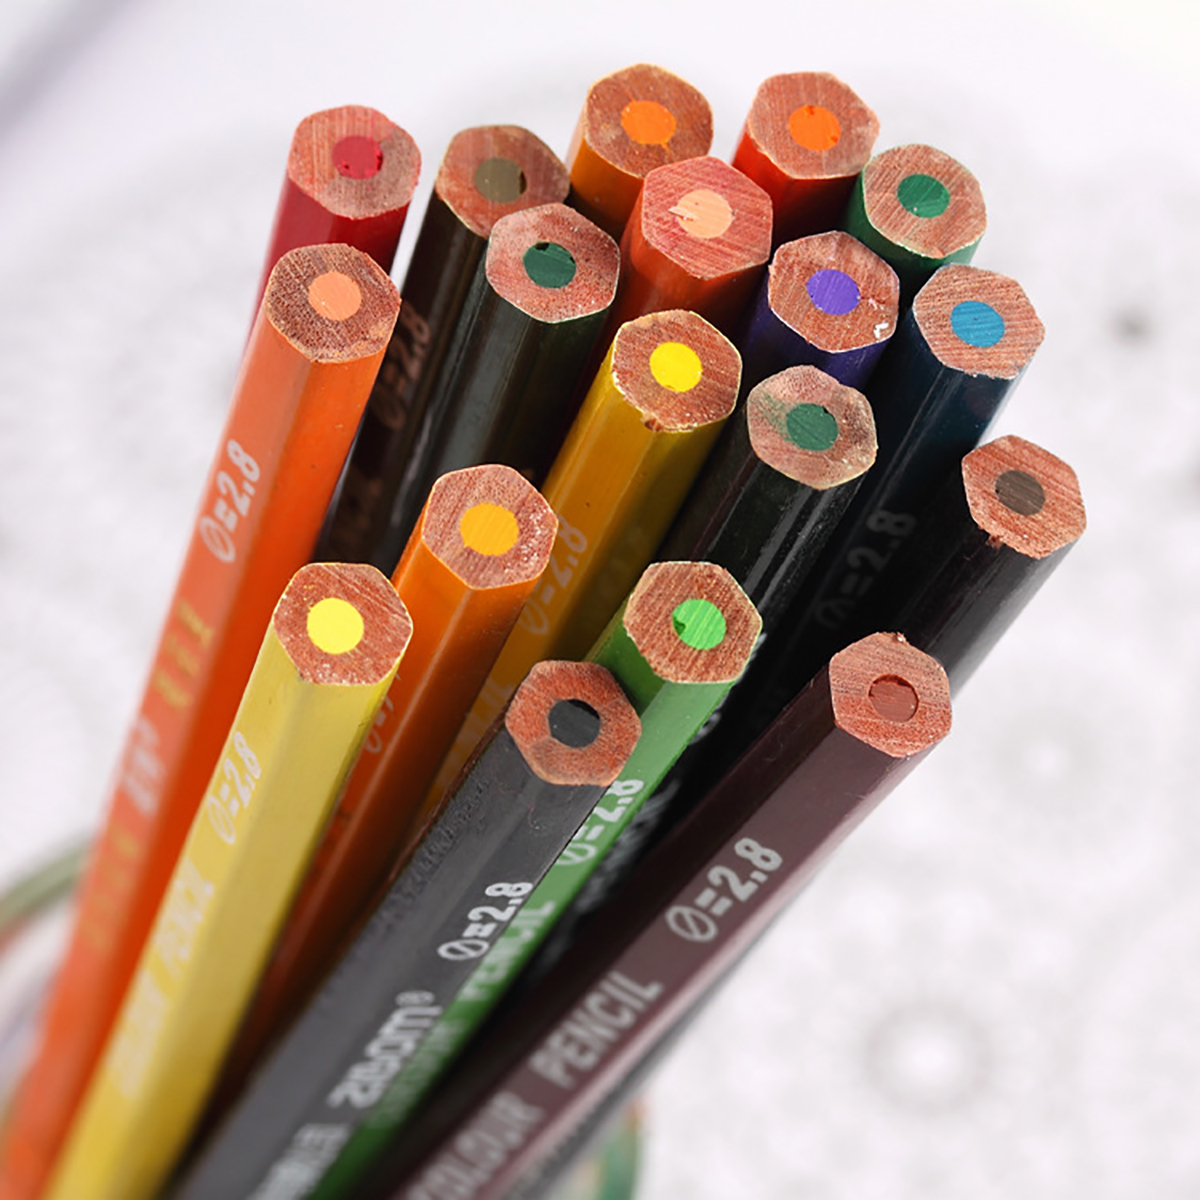 12-Colors-Wood-Color-Pencils-Set-Non-toxic-Artist-Painting-Oil-Pencil-for-School-Office-Drawing-Sket-1742753-5